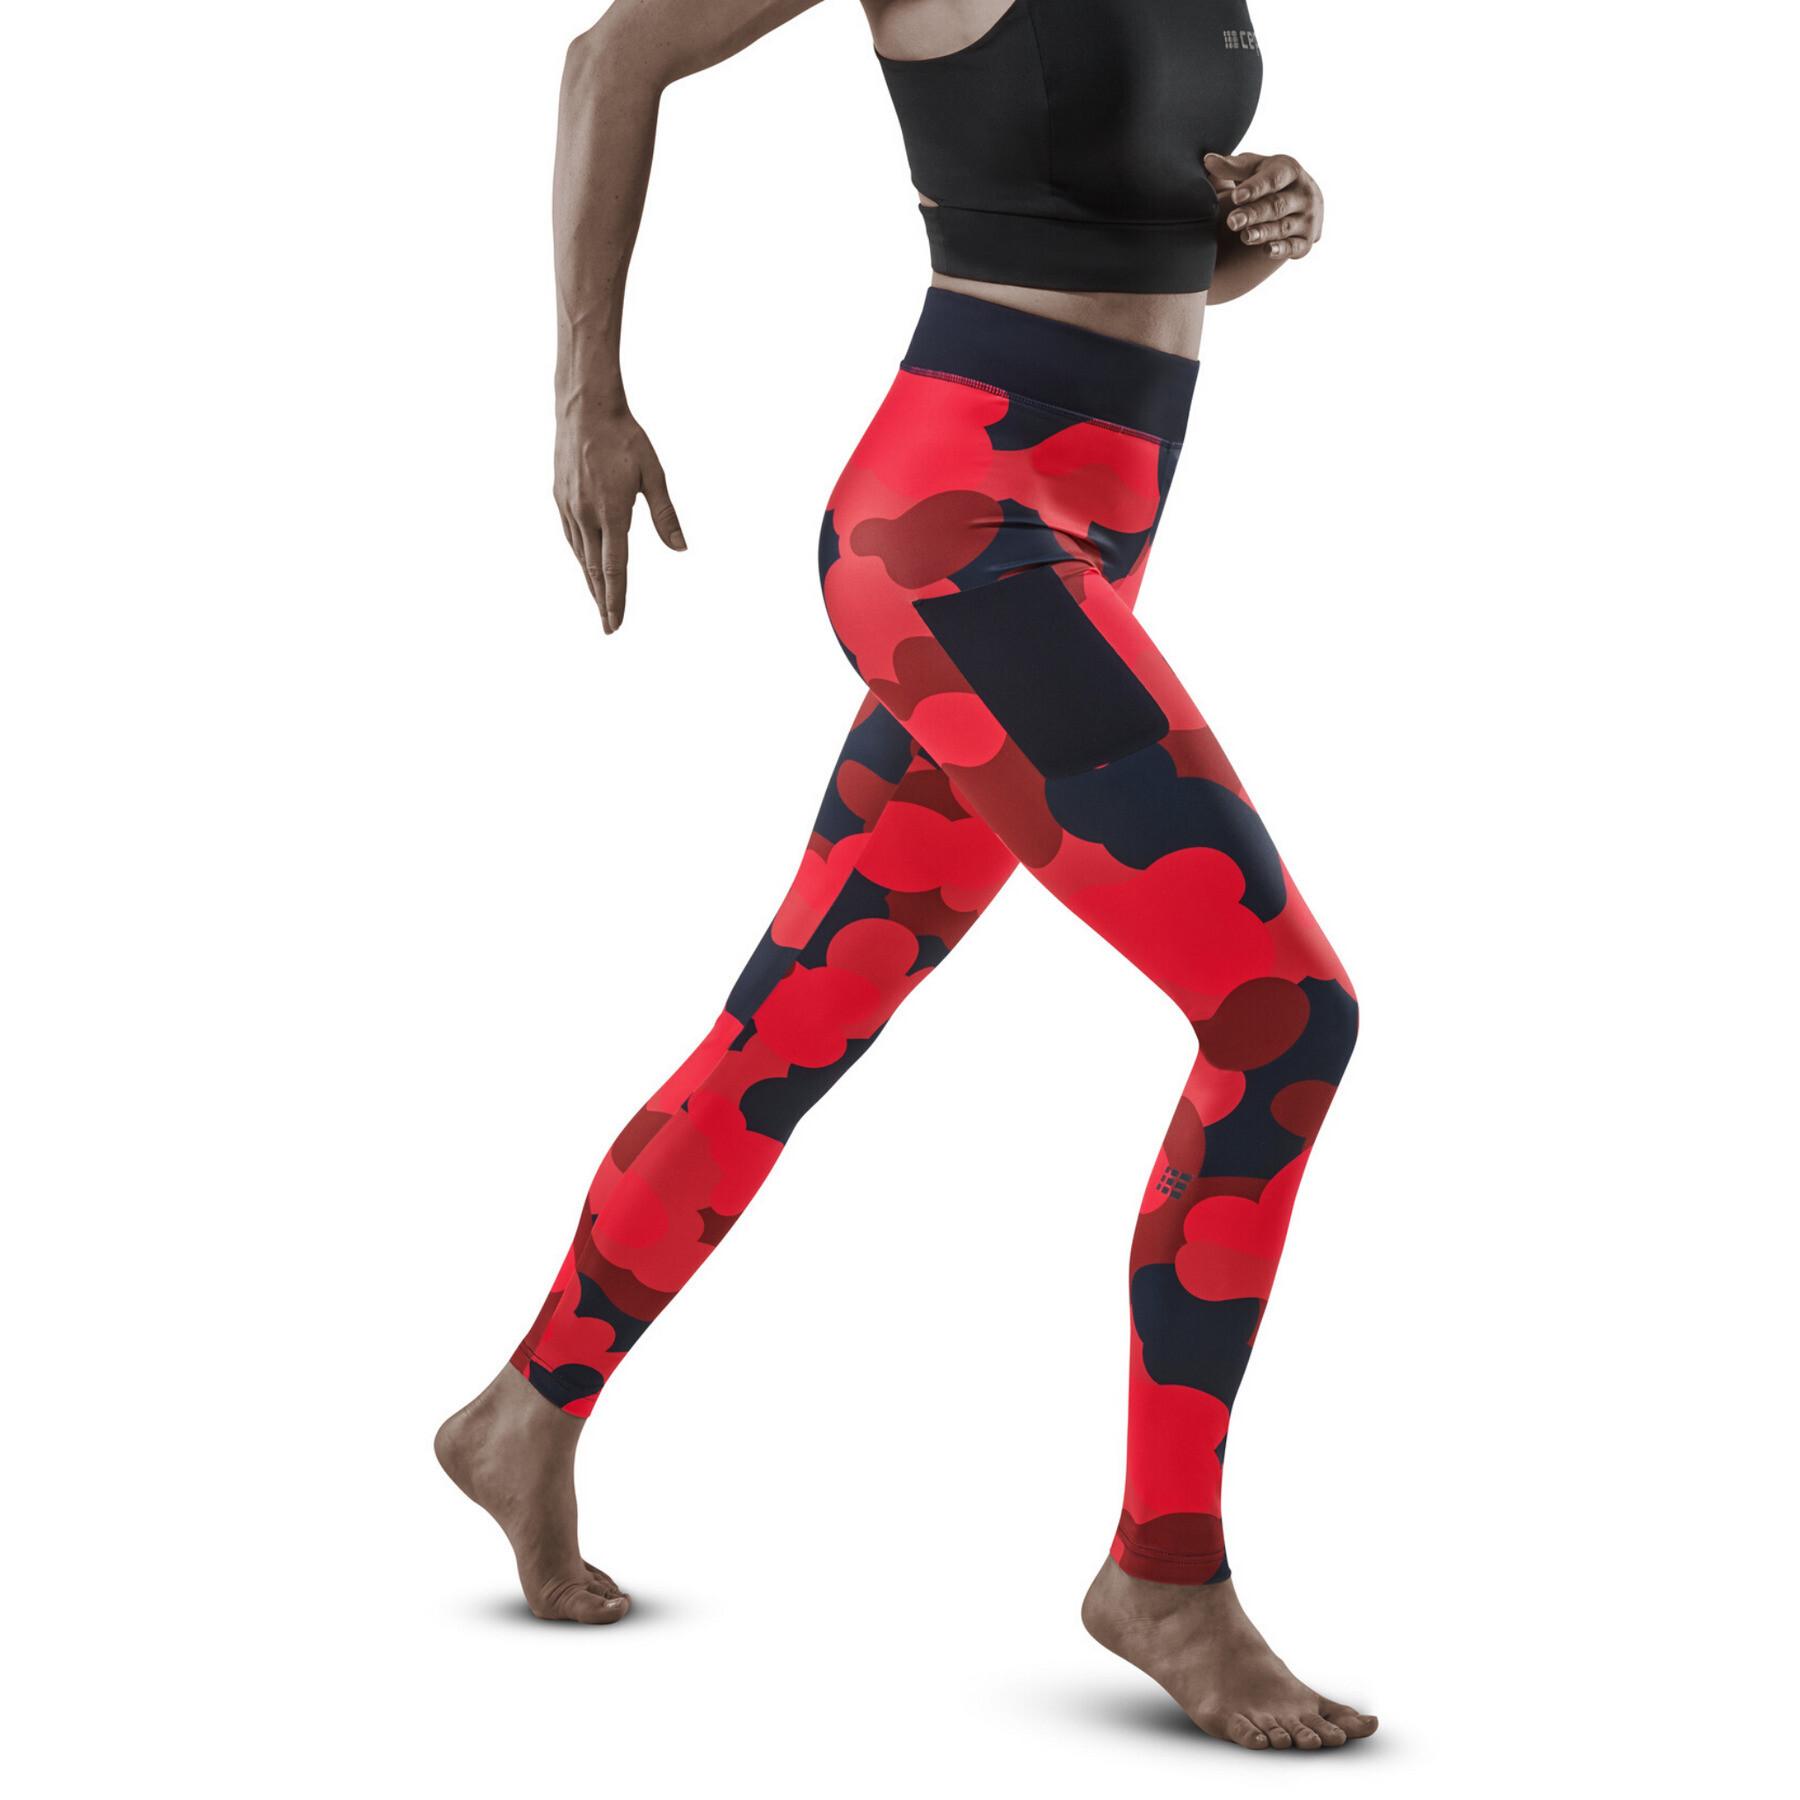 Women's wear - On Running M Track Pants - Slocog wear - Baselayers - Legging  woman CEP Compression Camocloud